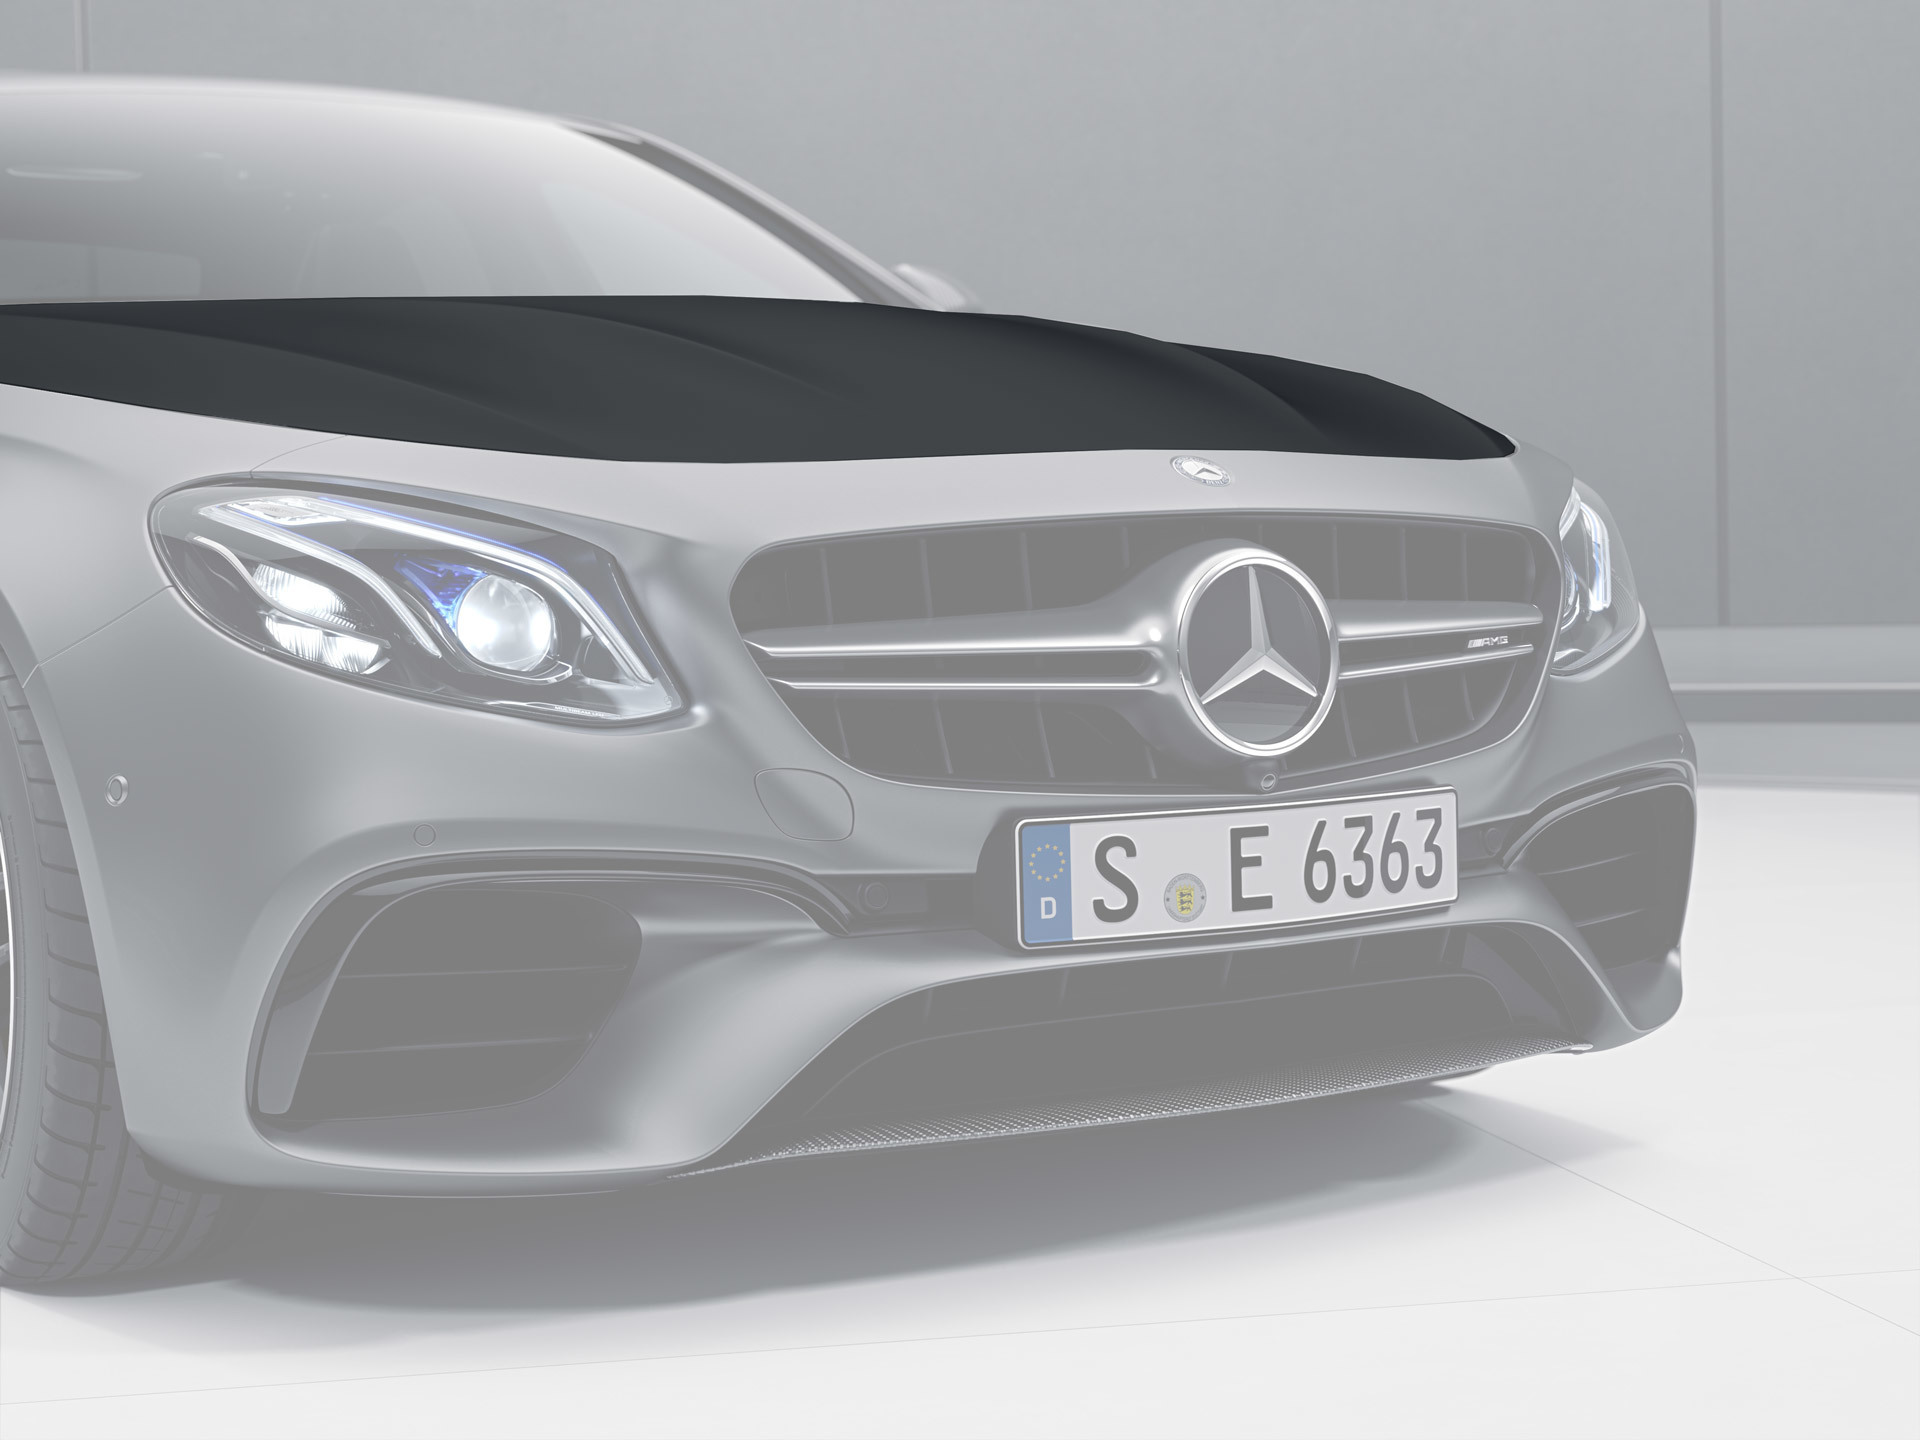 Hodoor Performance Carbon fiber hood 63 AMG Style for Mercedes E-class W213